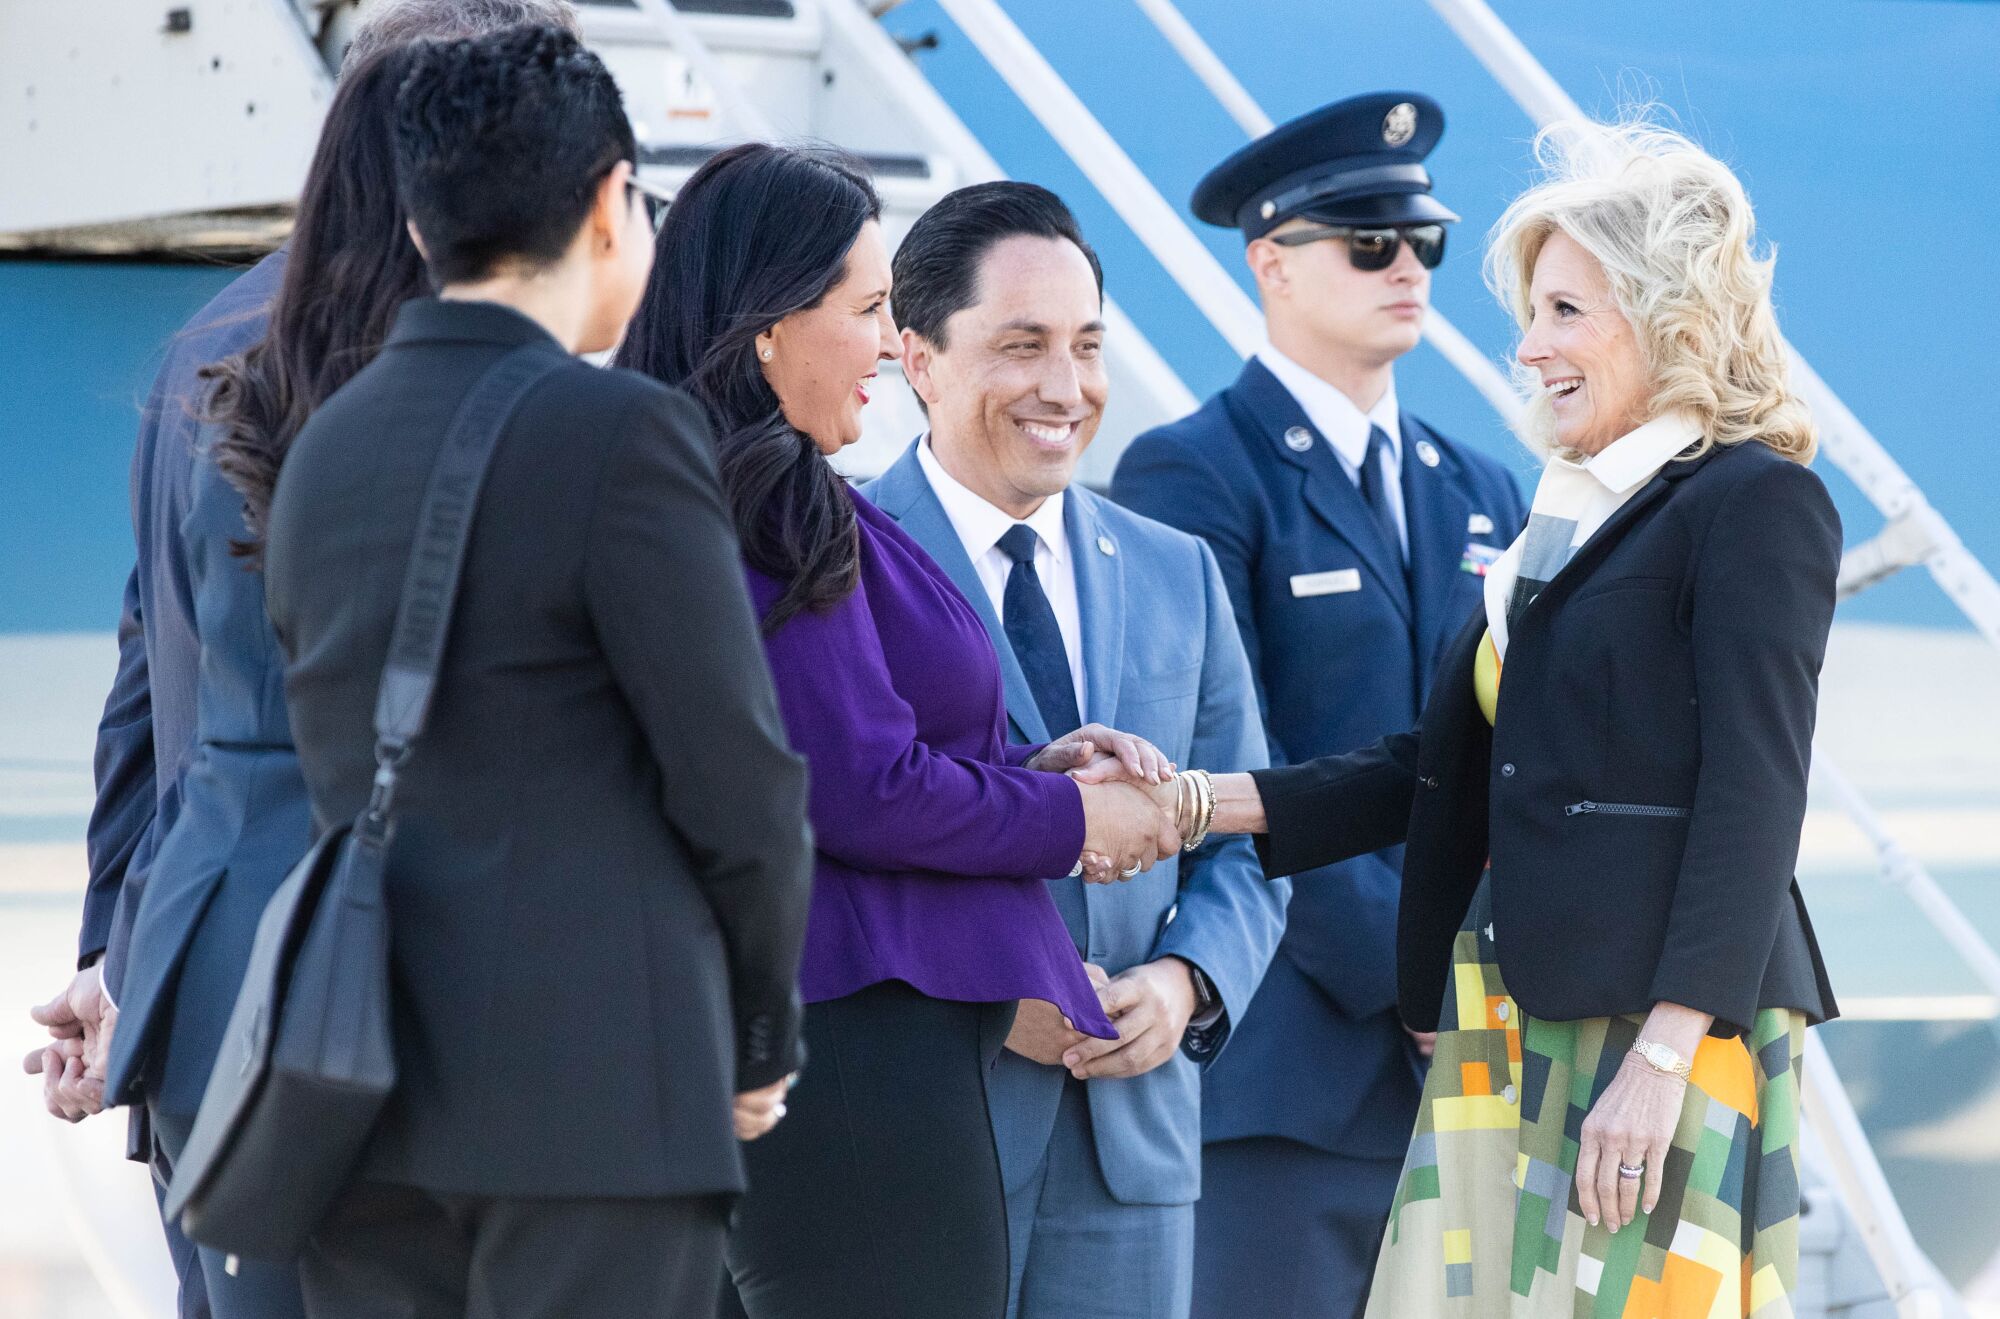 First Lady Dr. Jill Biden is greeted by mayor Todd Gloria and Chair of the San Diego County Board of Supervisors Nora Vargas.